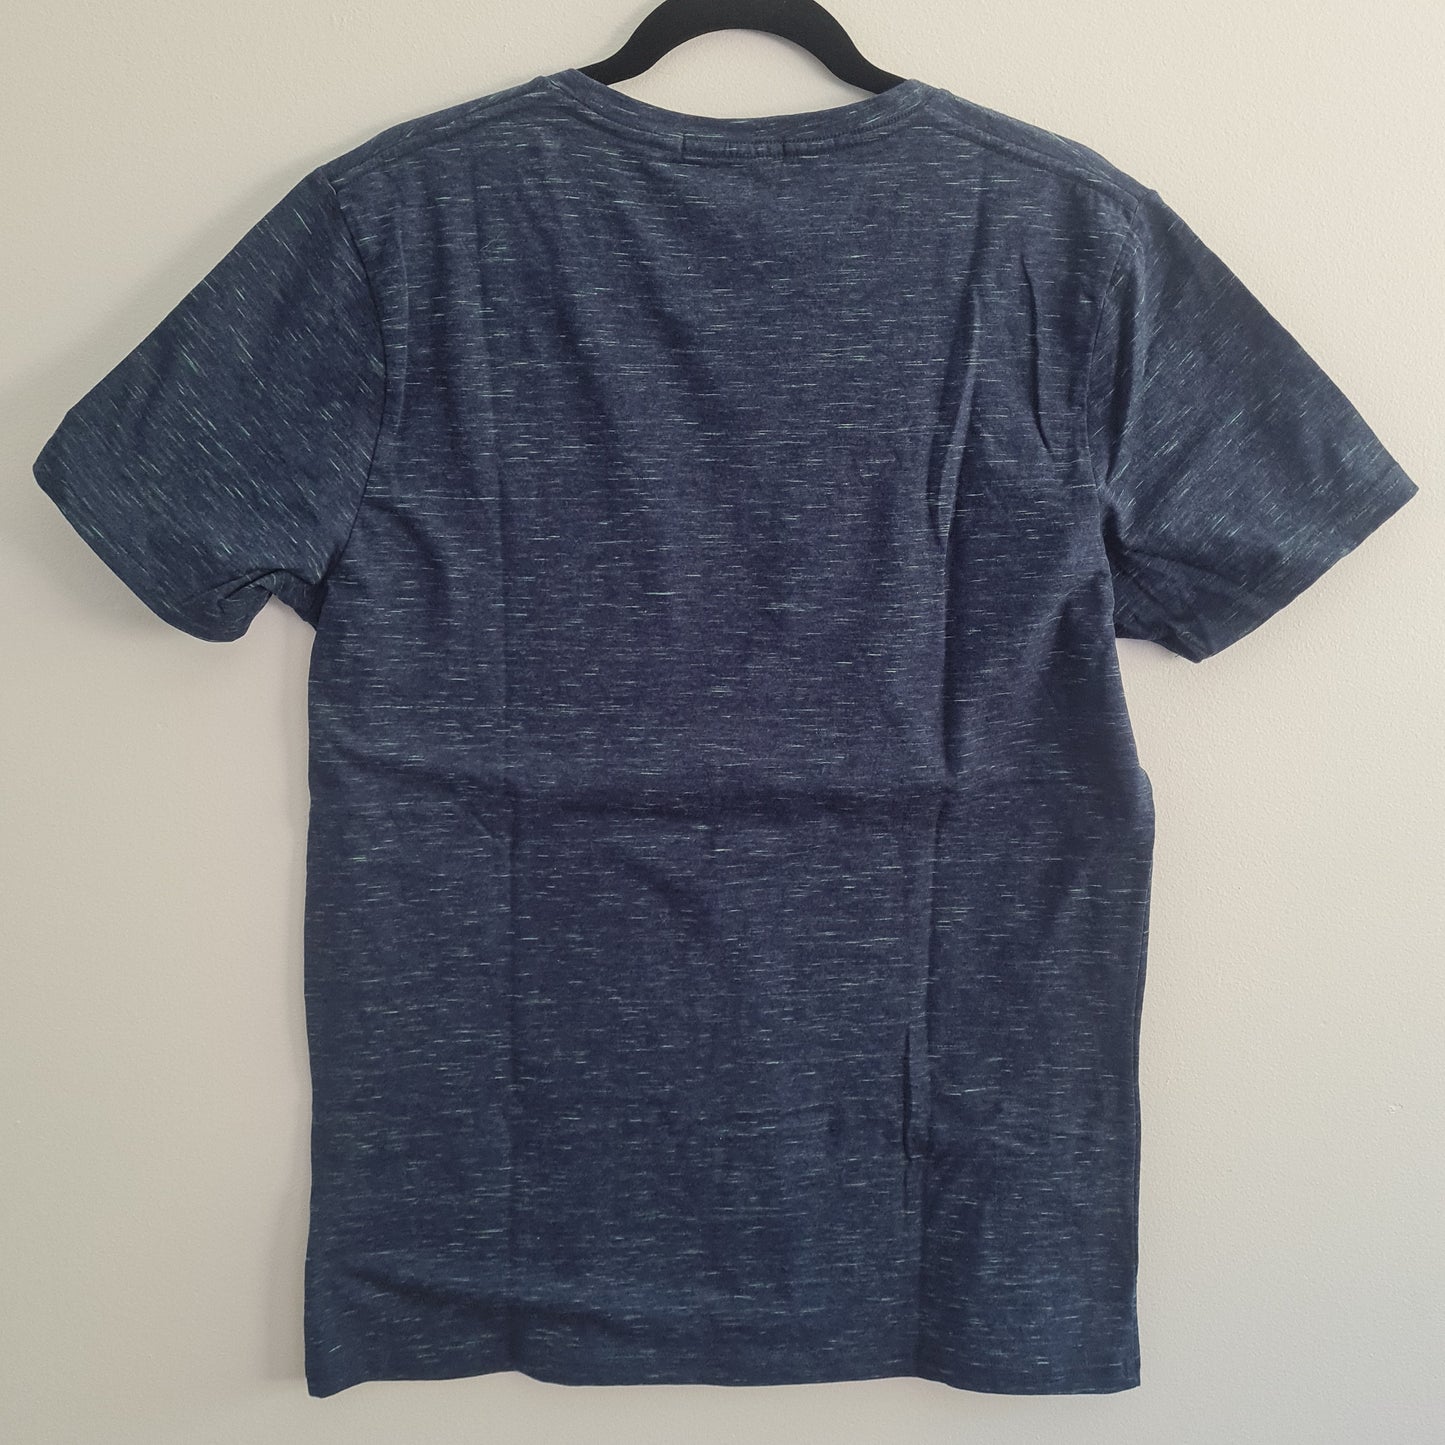 French Connection Indigo T-Shirt Size L